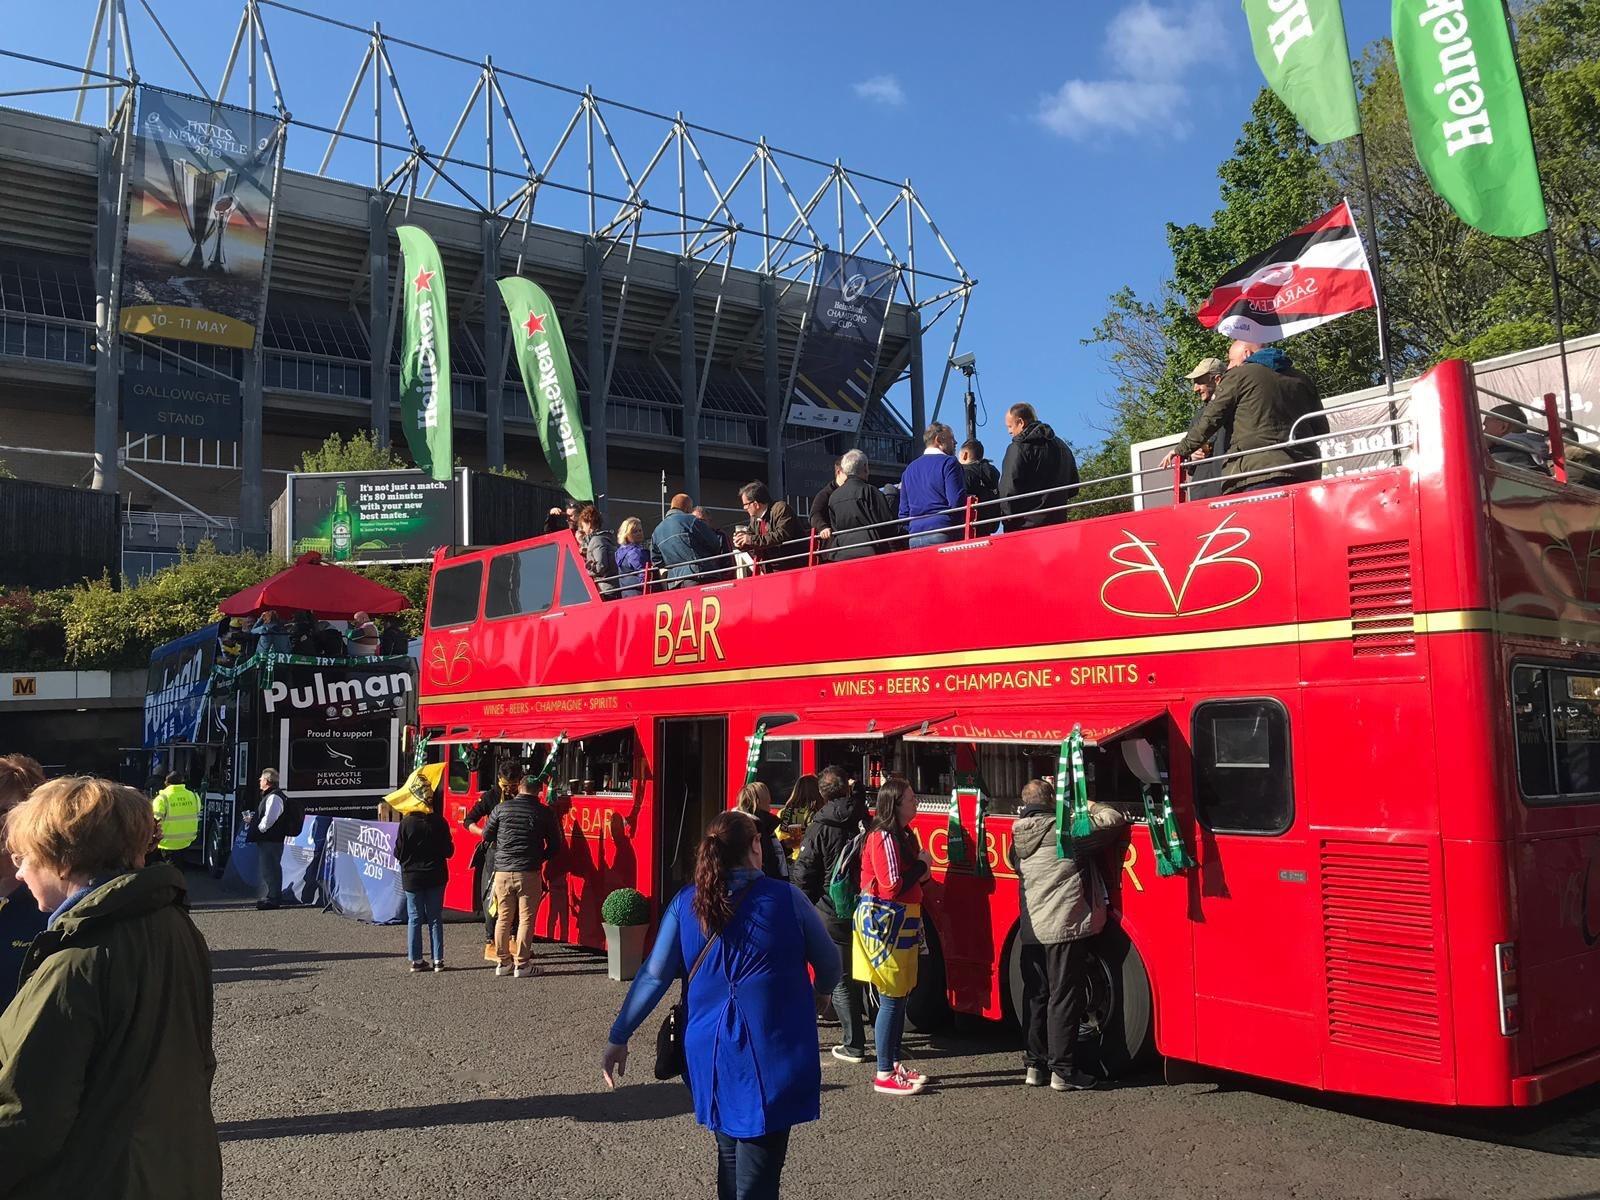 The Fan Zone at St James' Park during the European Finals weekend